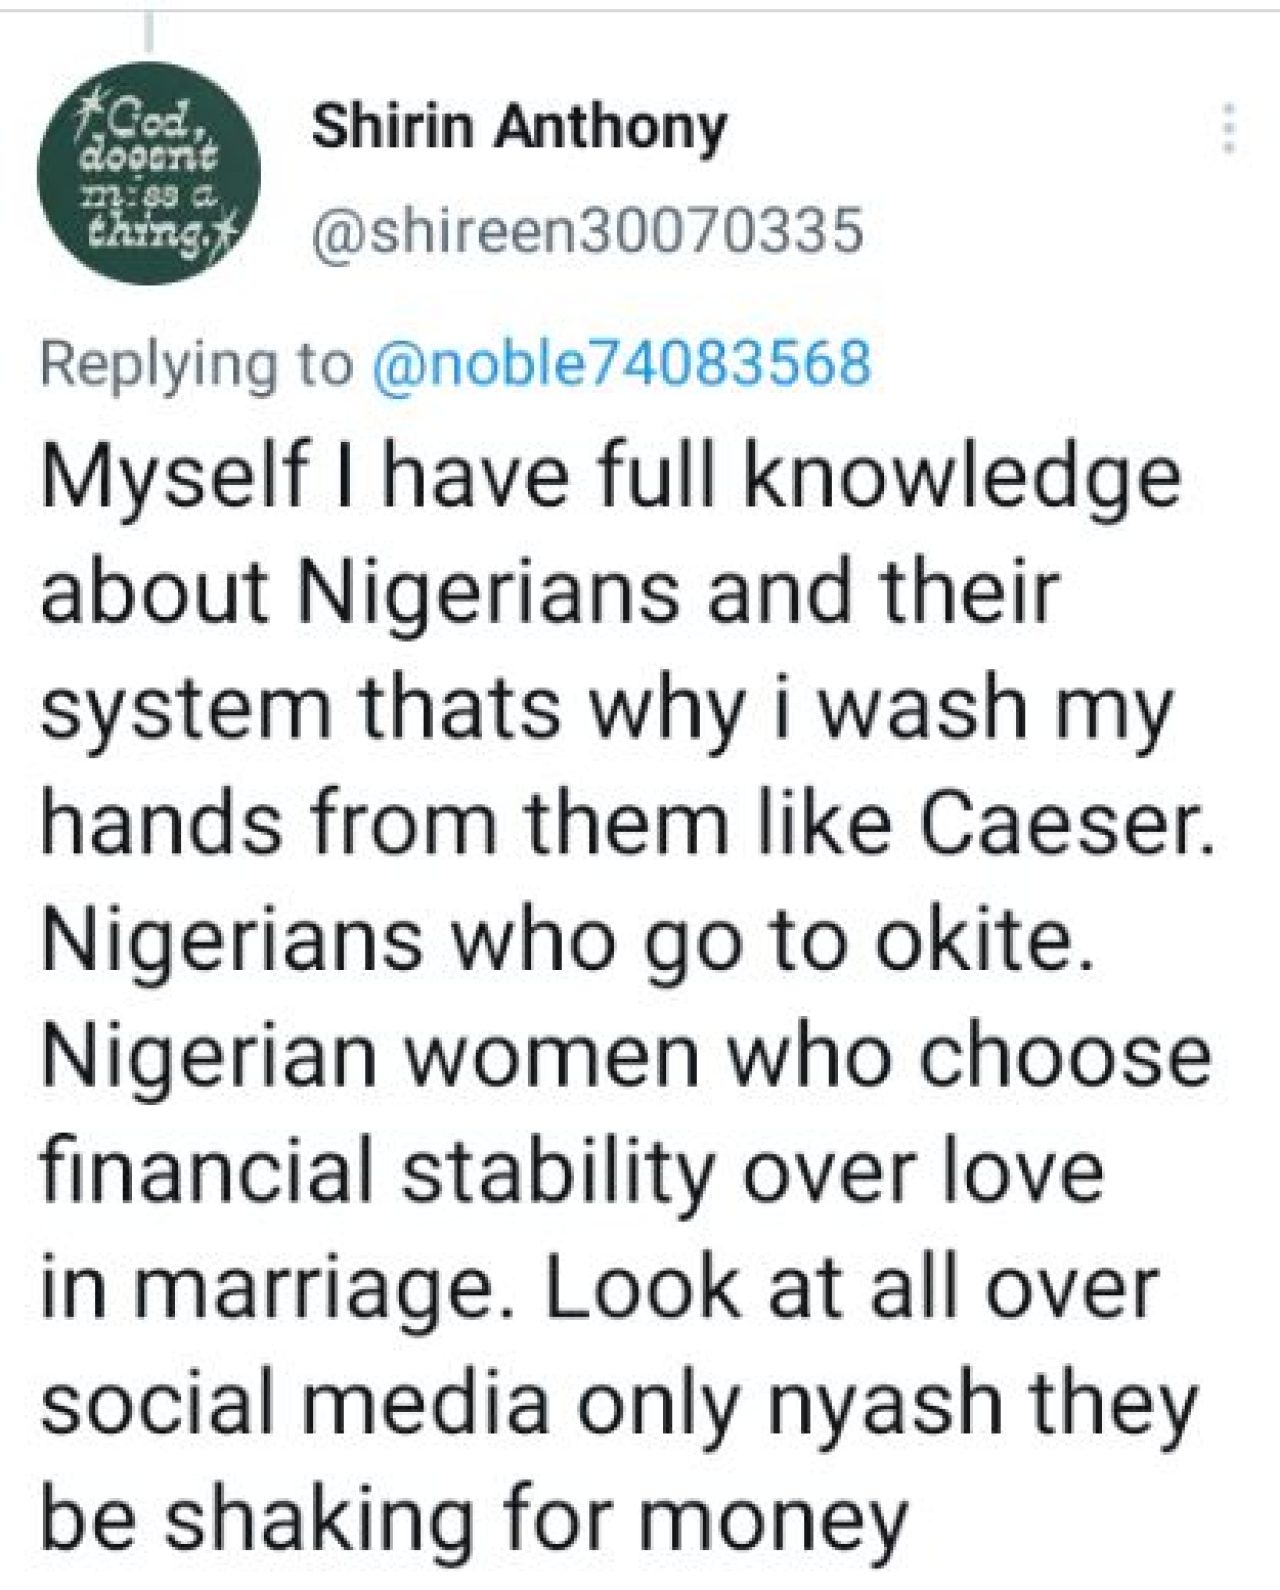 Talk to them and they will carry their ancestors debts on your head - Indian widow of Nigerian man drags Naija women on SM. Afro News Wire